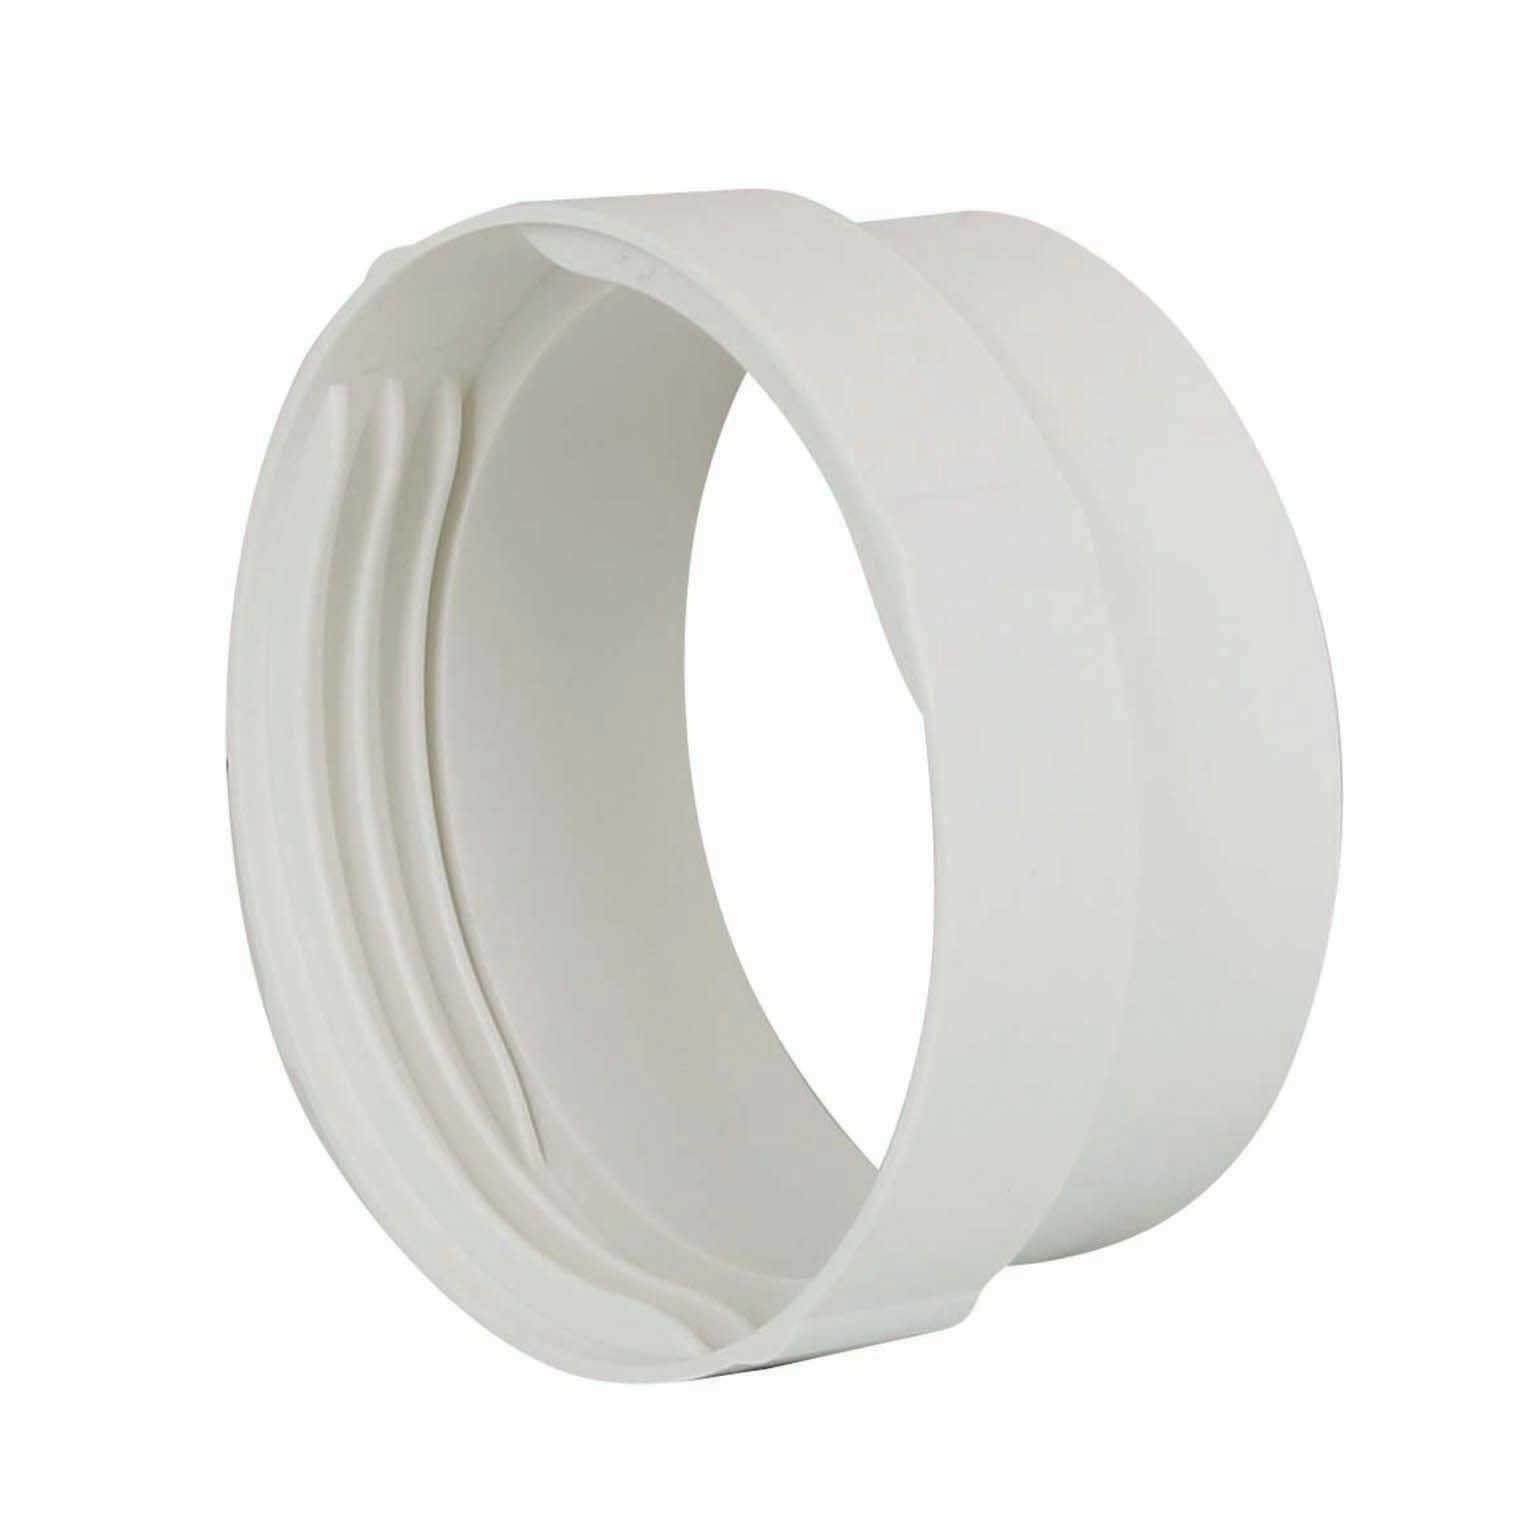 Image of Manrose PVC White Round Male Connector - 100mm